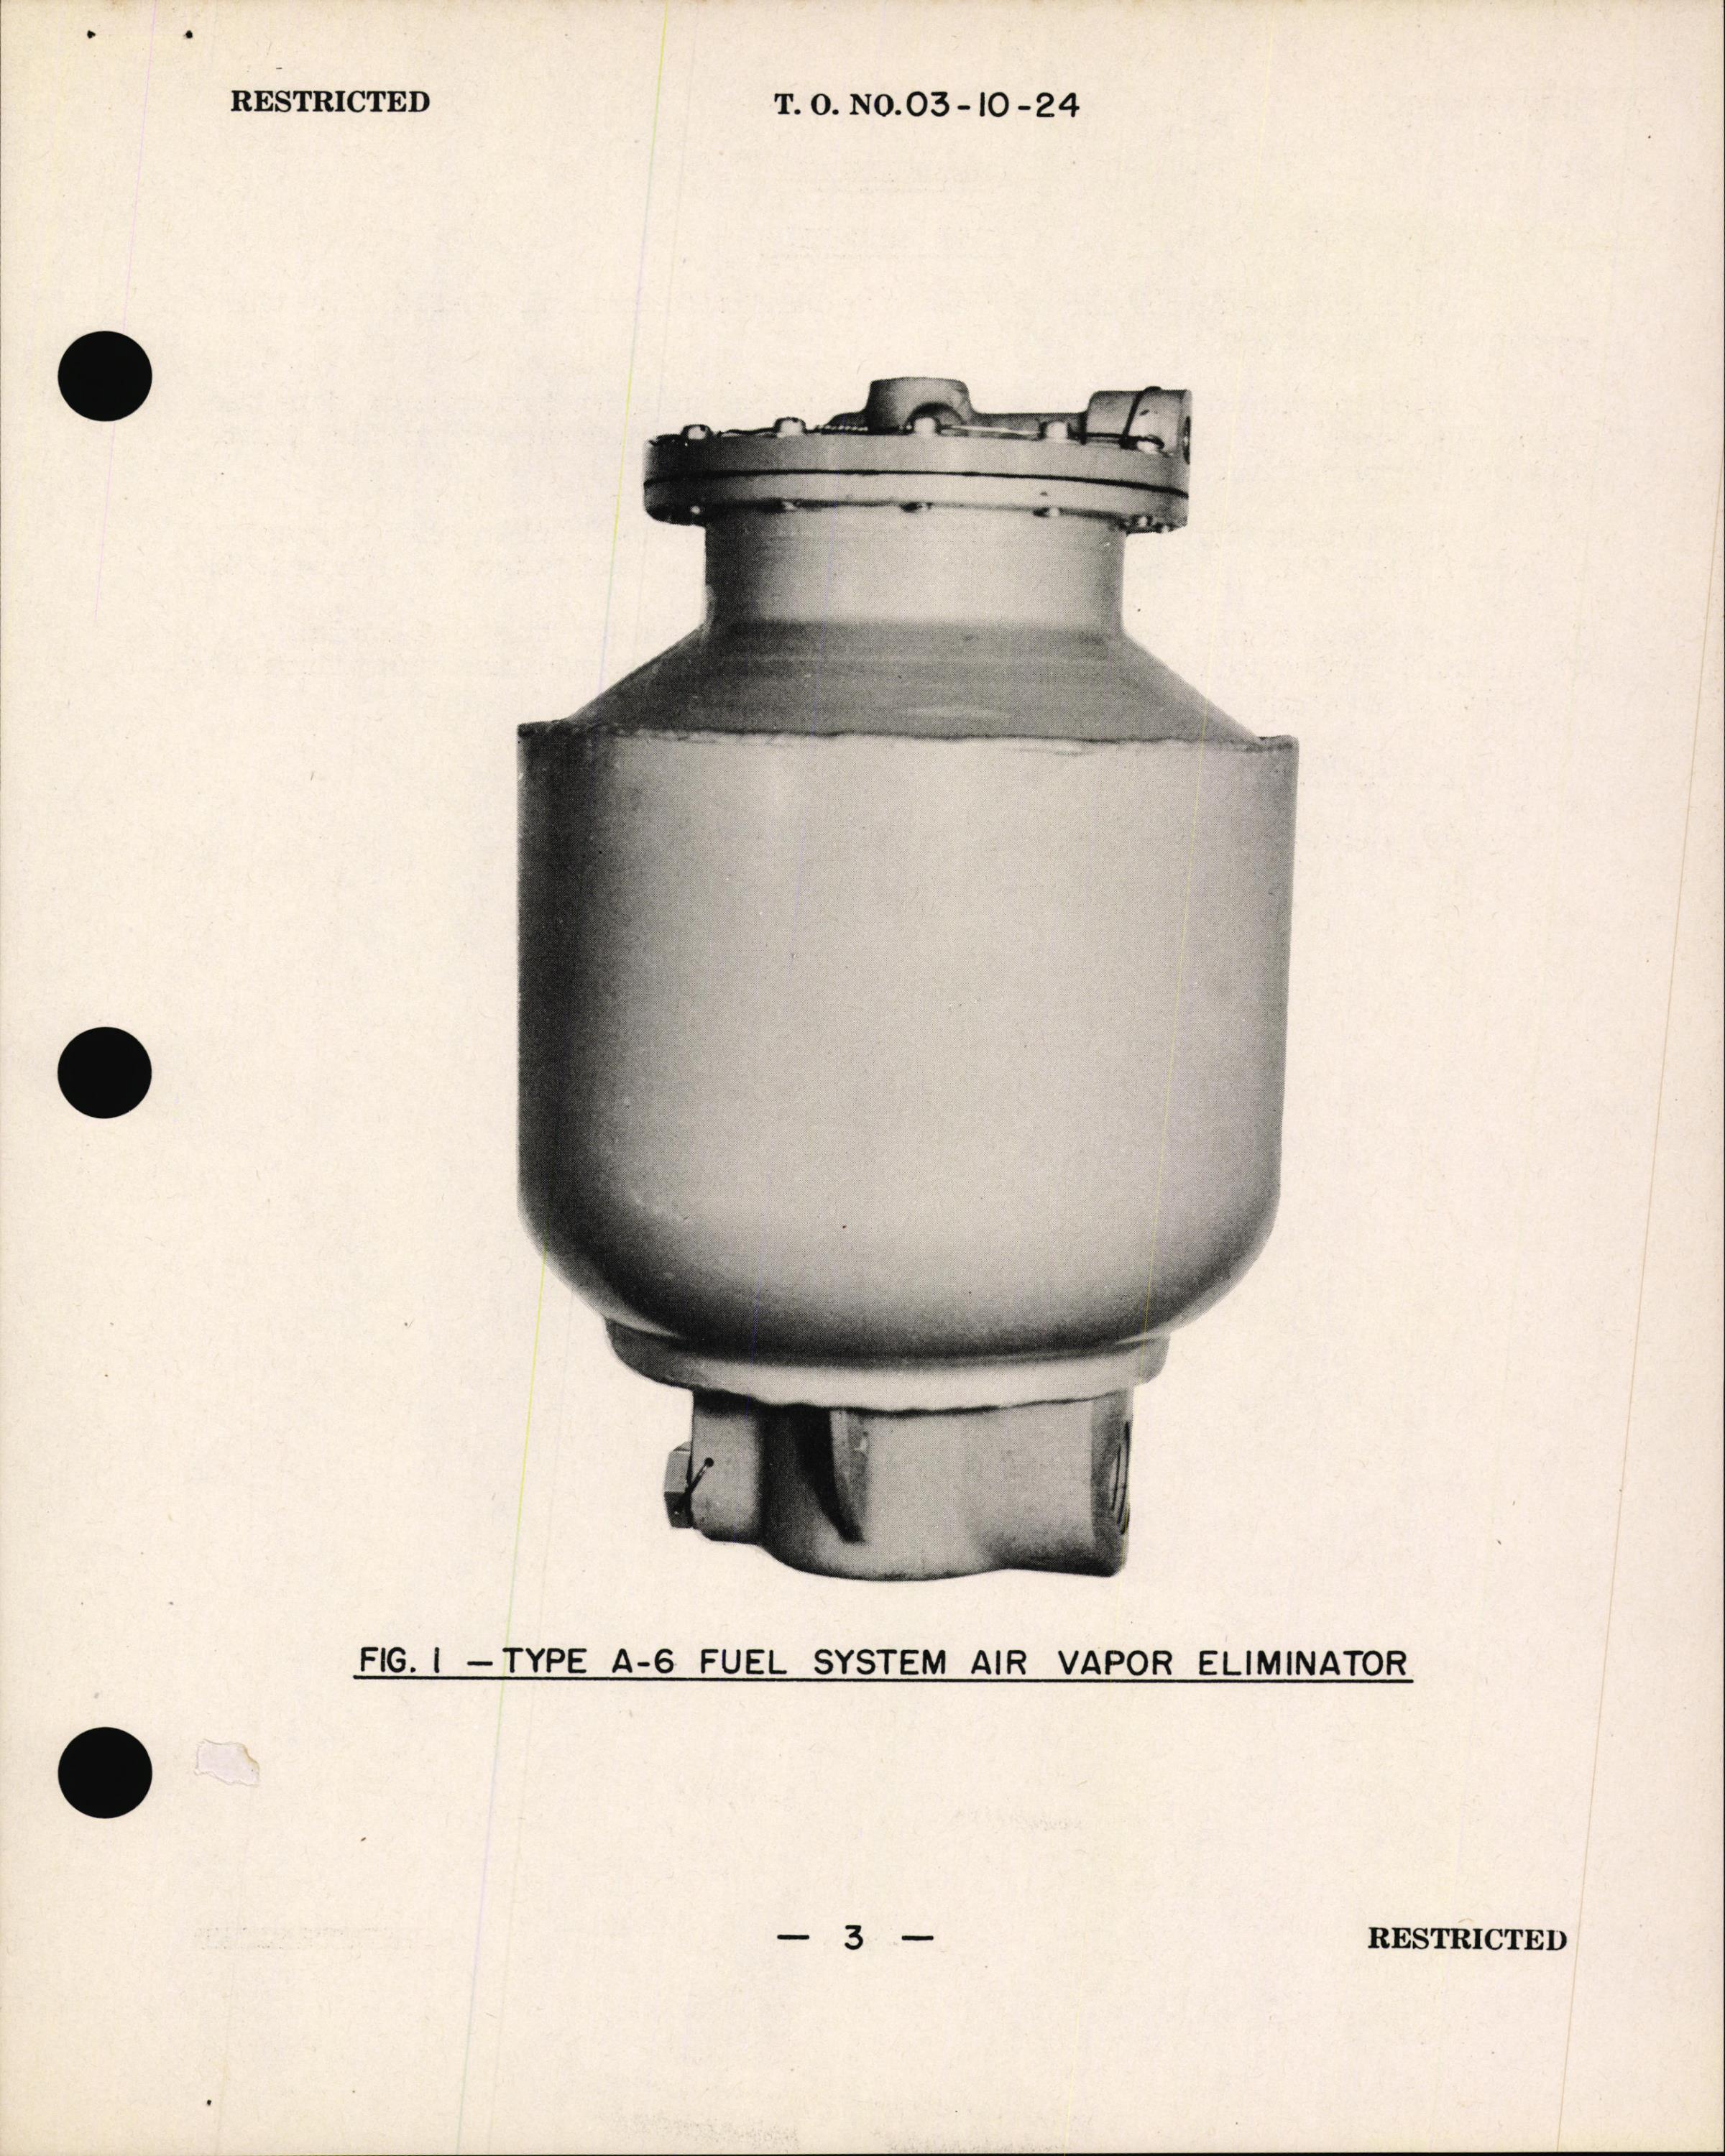 Sample page 5 from AirCorps Library document: Instructions with Parts Catalog for Fuel System Air Vapor Eliminator Type A-6 